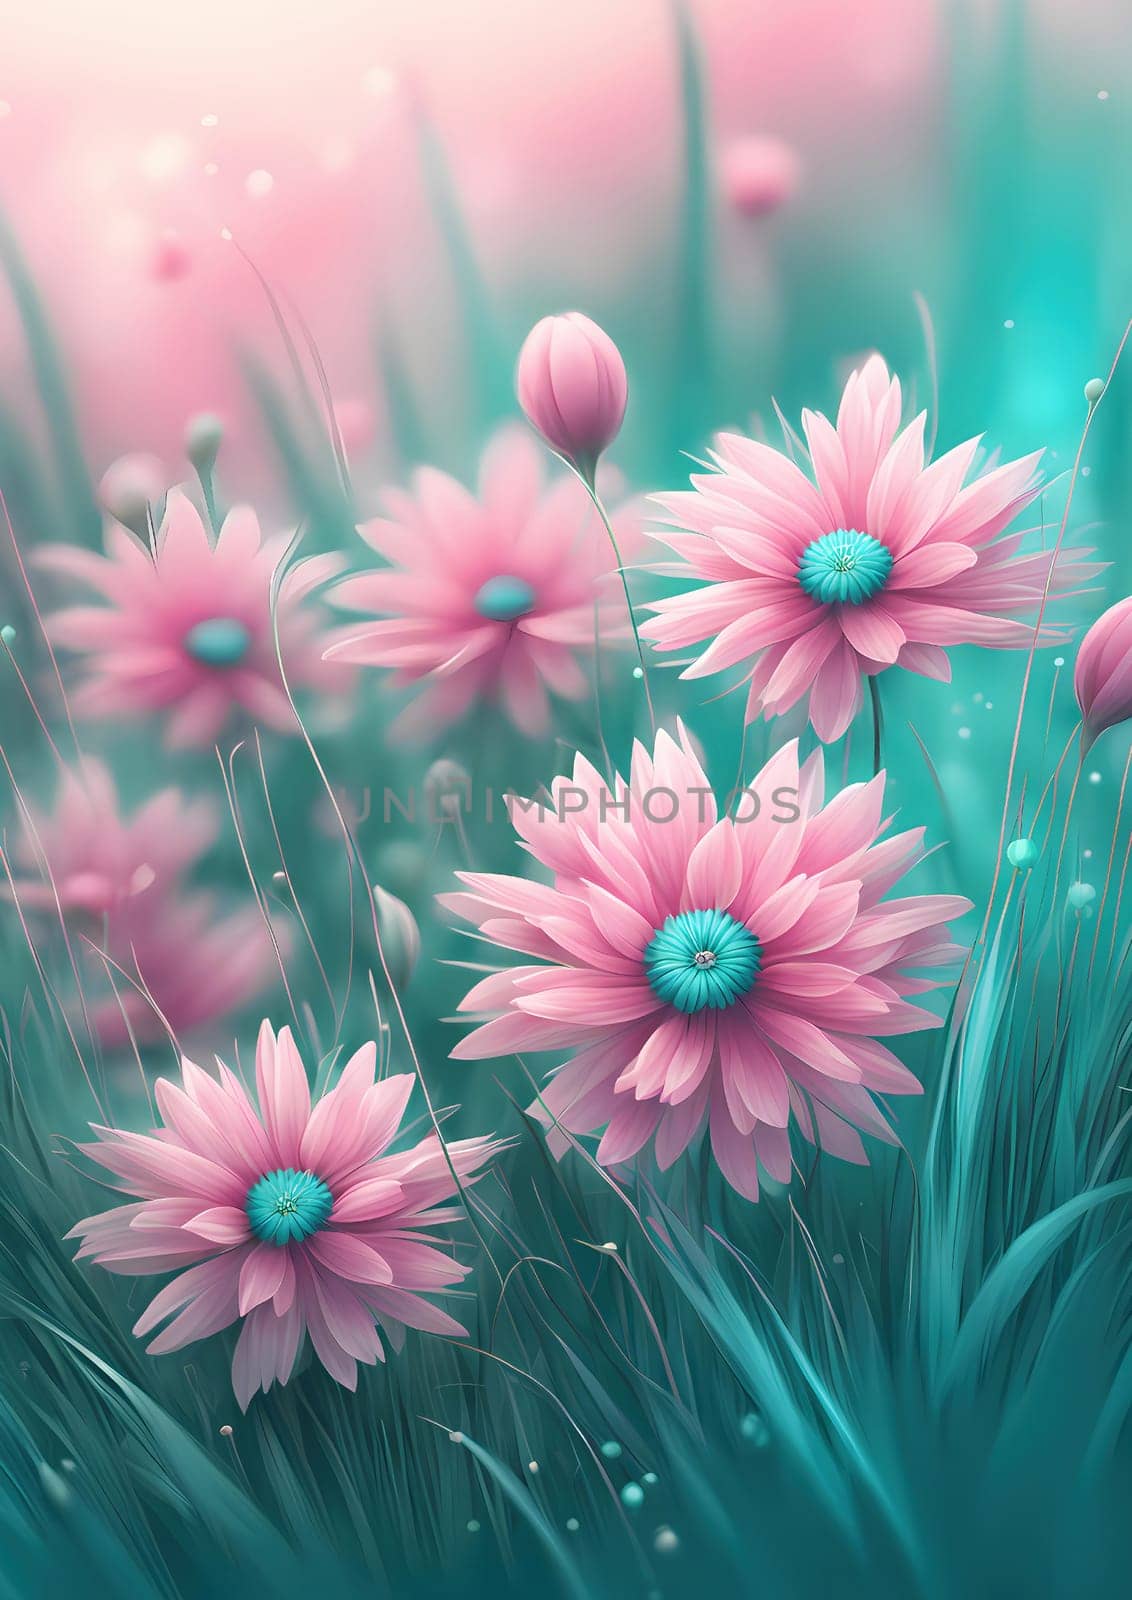 there are many pink flowers growing in the grass, beautiful exquisite art, teal, softly lit, depth of focus, radiating connection inside, soft pale tone, cute illustration, smoothly shaded Generate AI